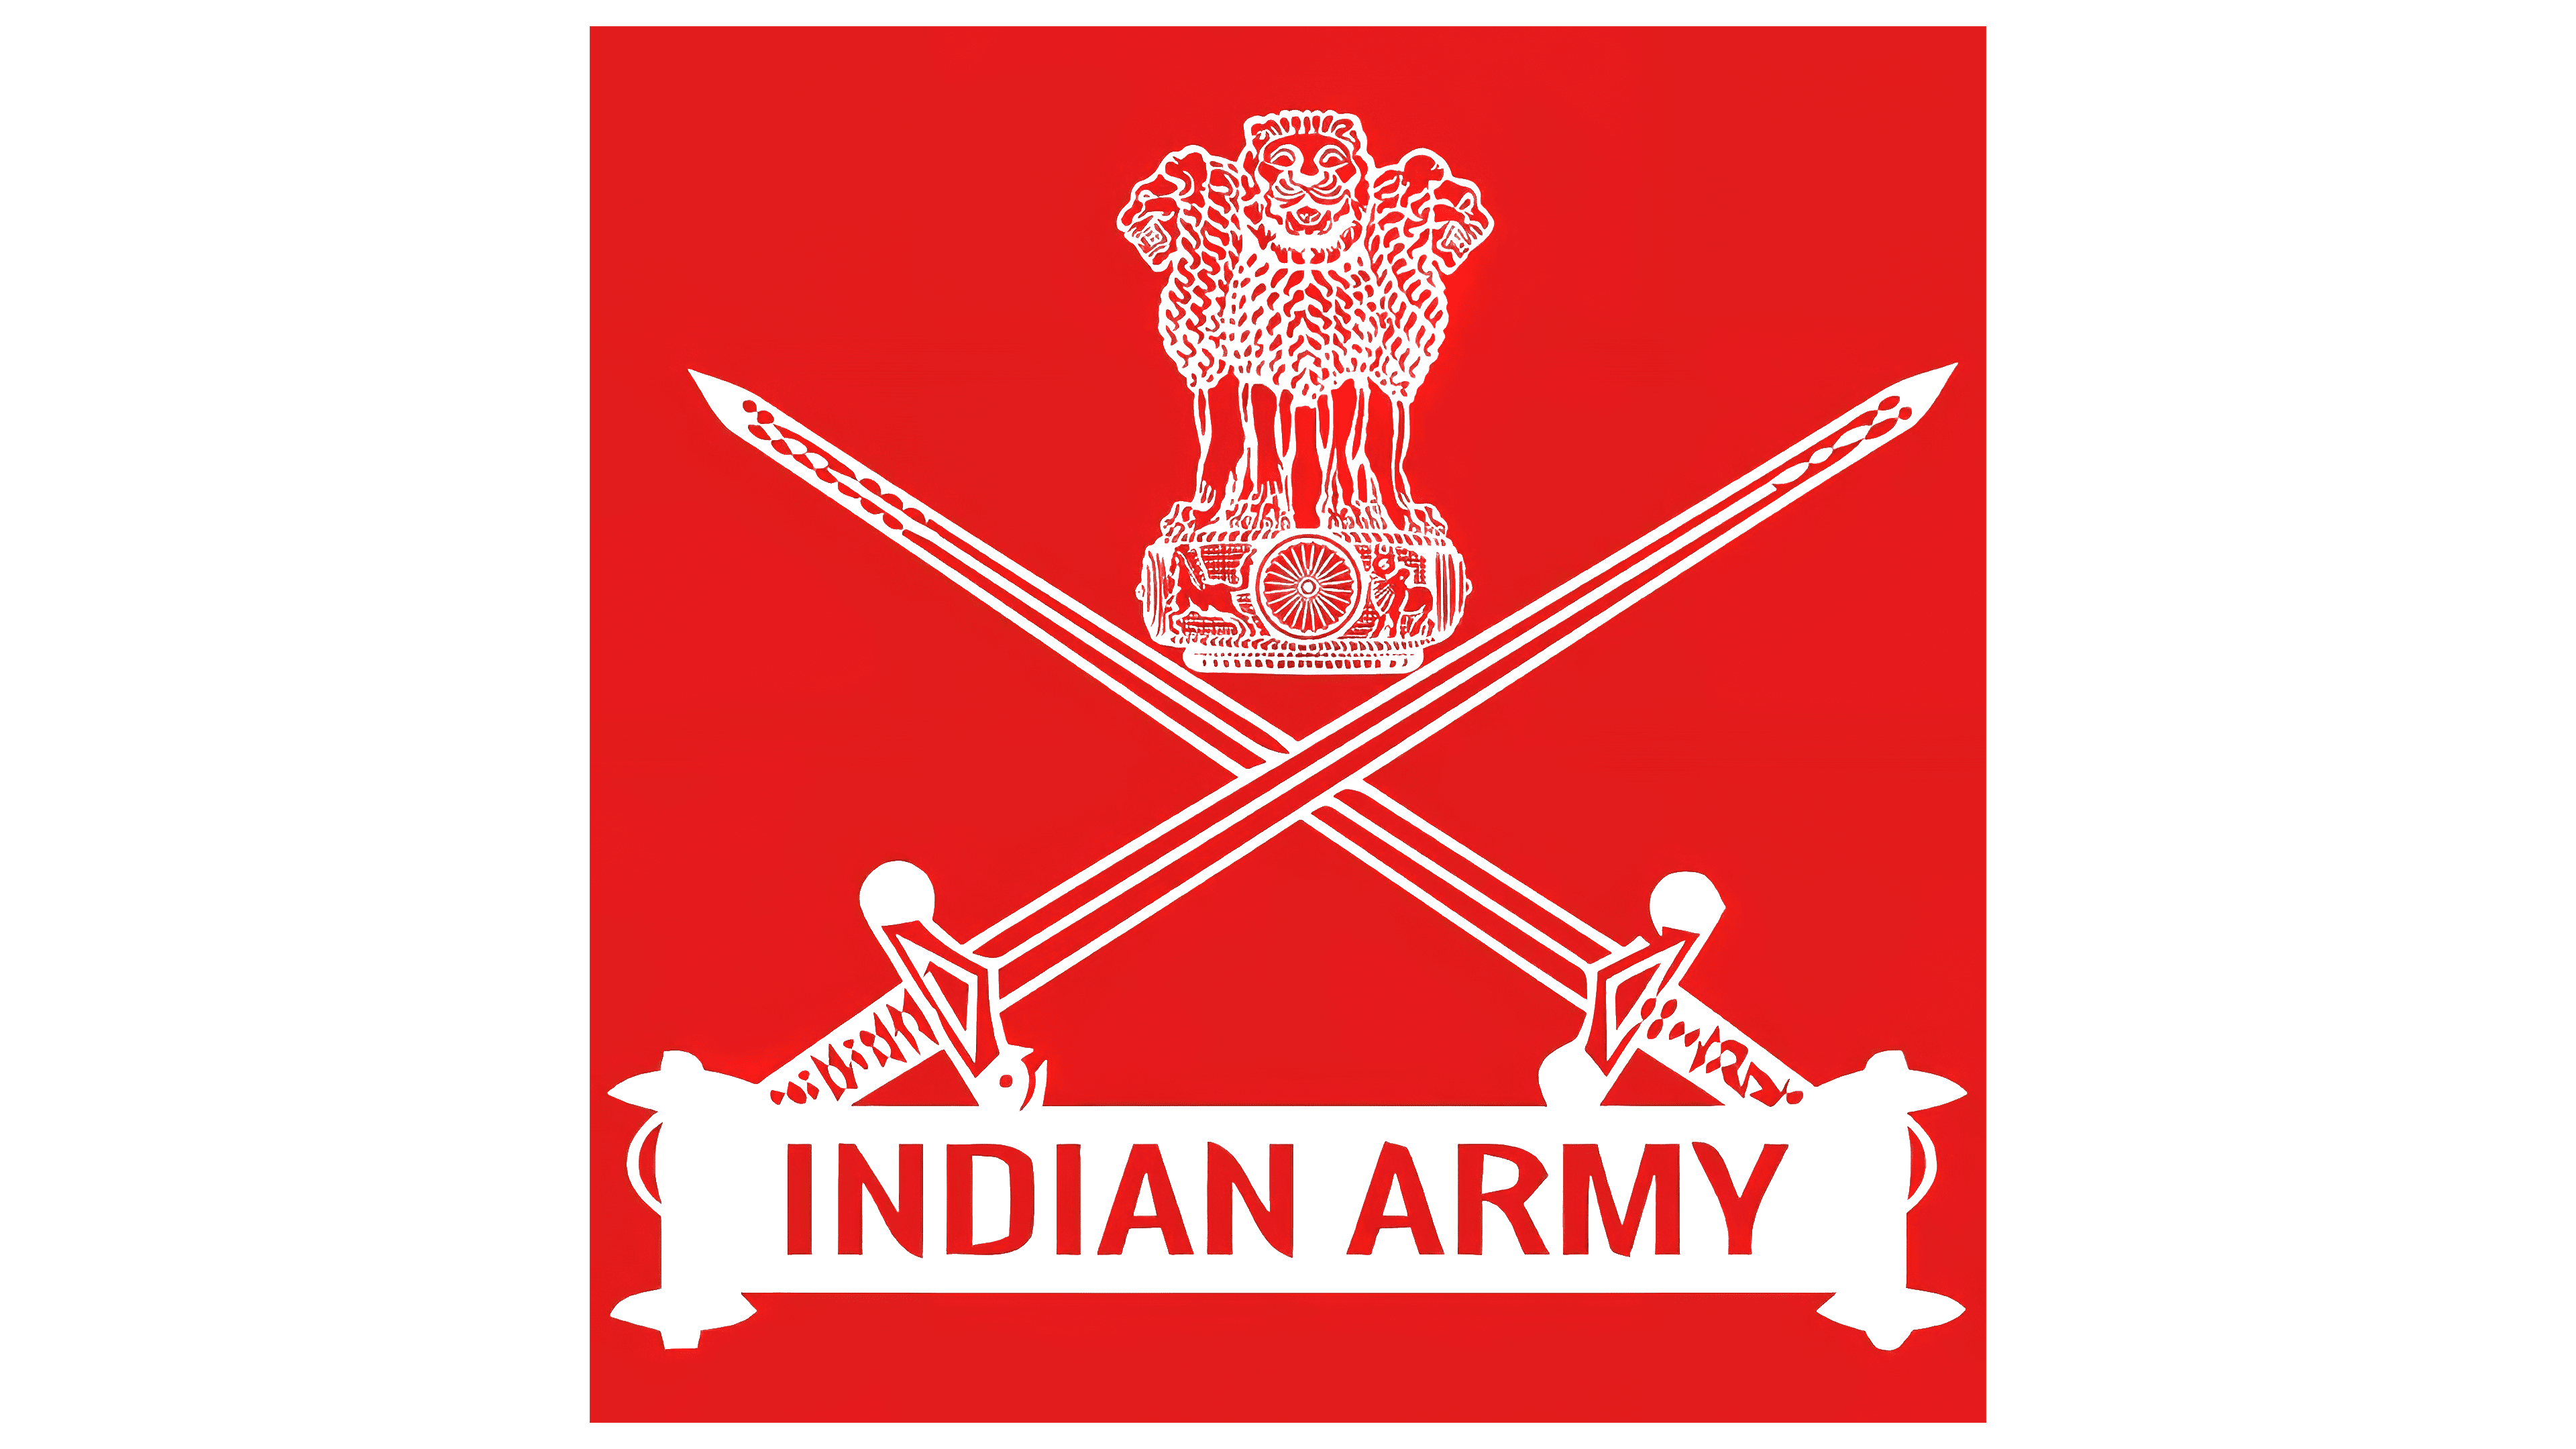 Indian army soilder nation hero on pride of india Vector Image